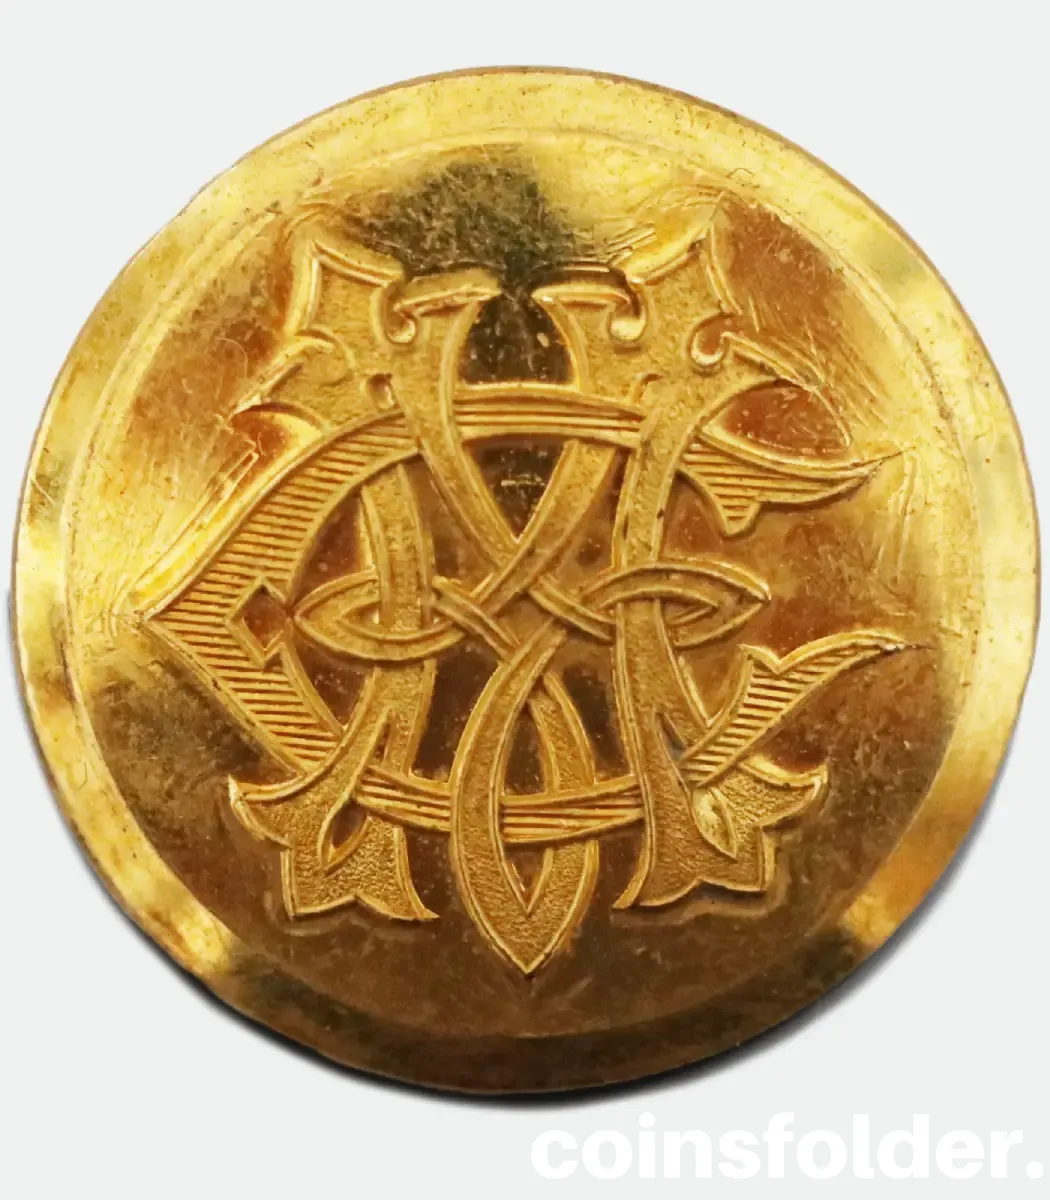 Vintage Spanish Livery Button with MC monogram by B. Castells E Hijos, Barcelona